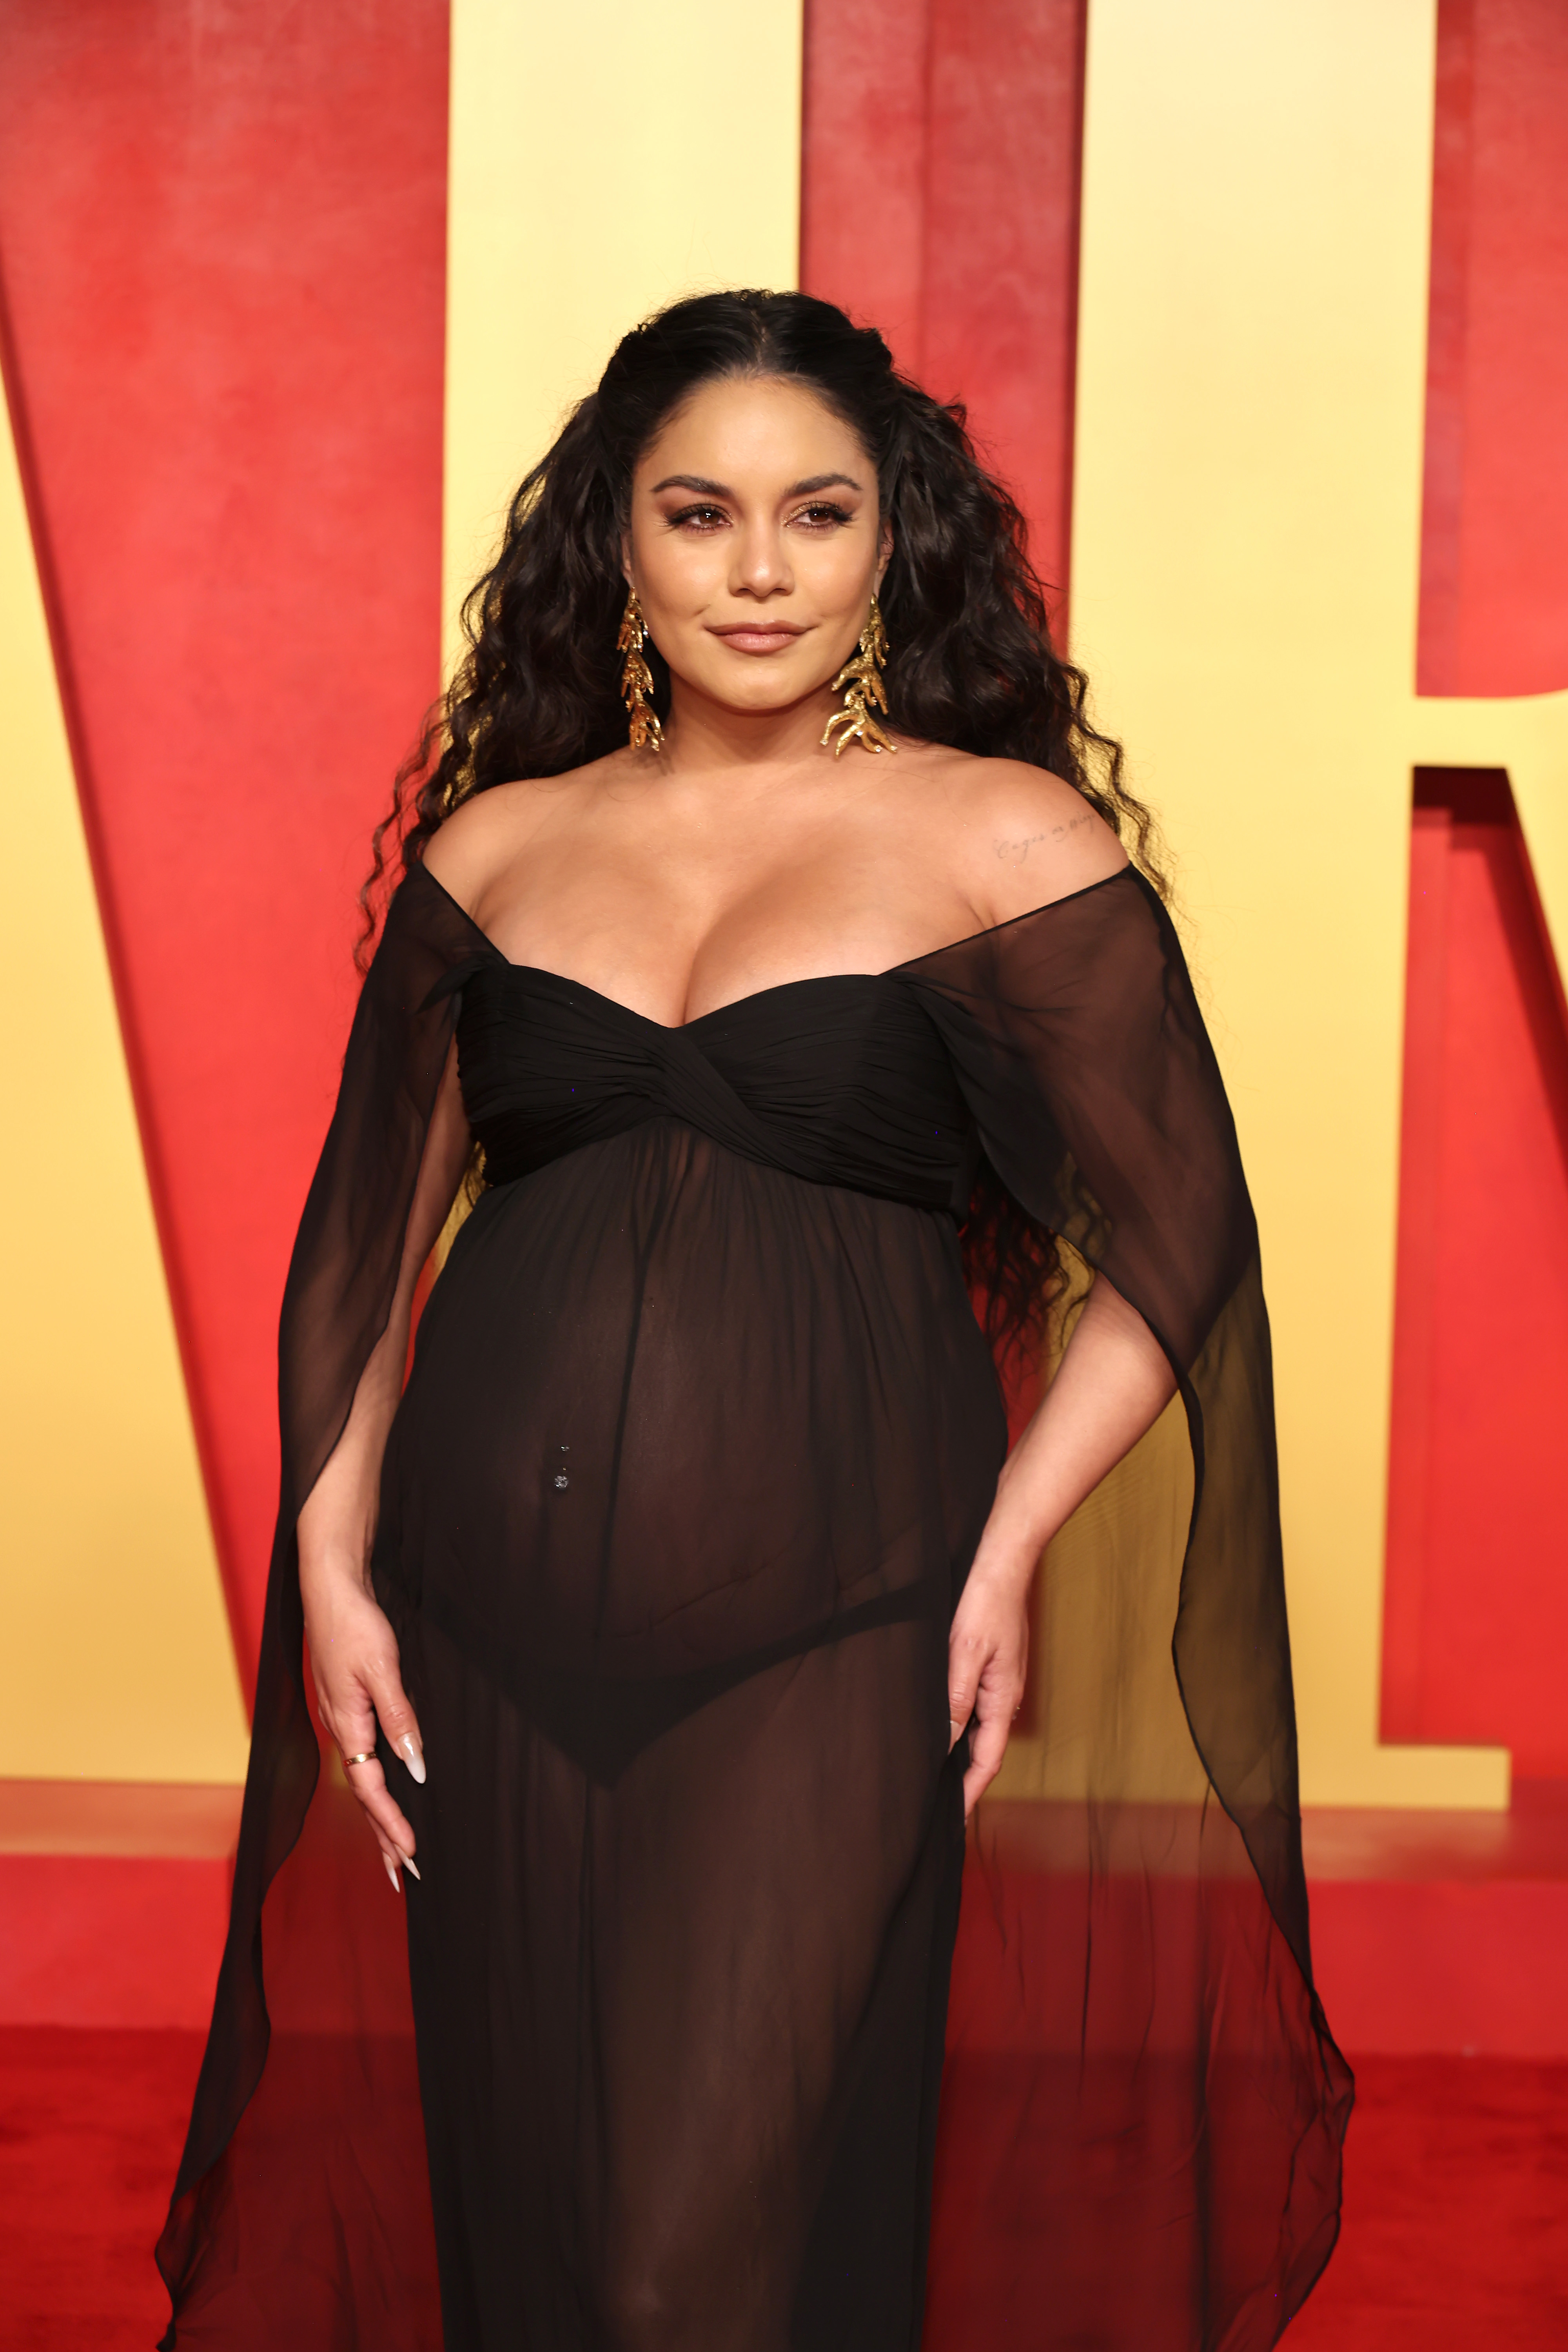 Vanessa Hudgens on a red carpet wearing a off-the-shoulder, sheer gown with gold earrings